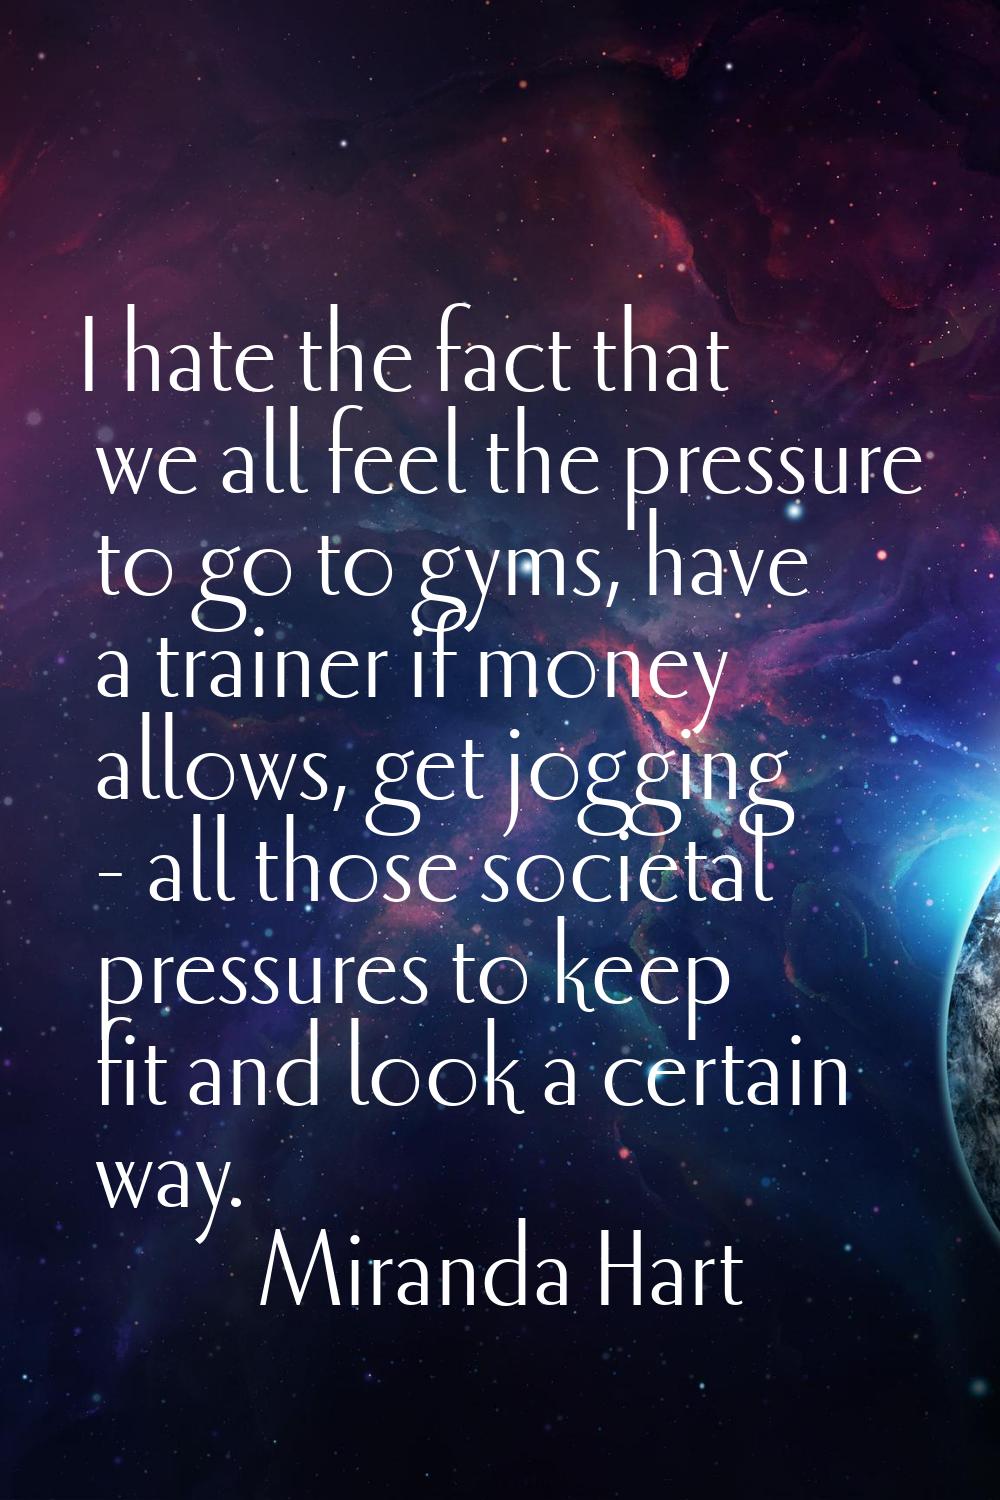 I hate the fact that we all feel the pressure to go to gyms, have a trainer if money allows, get jo